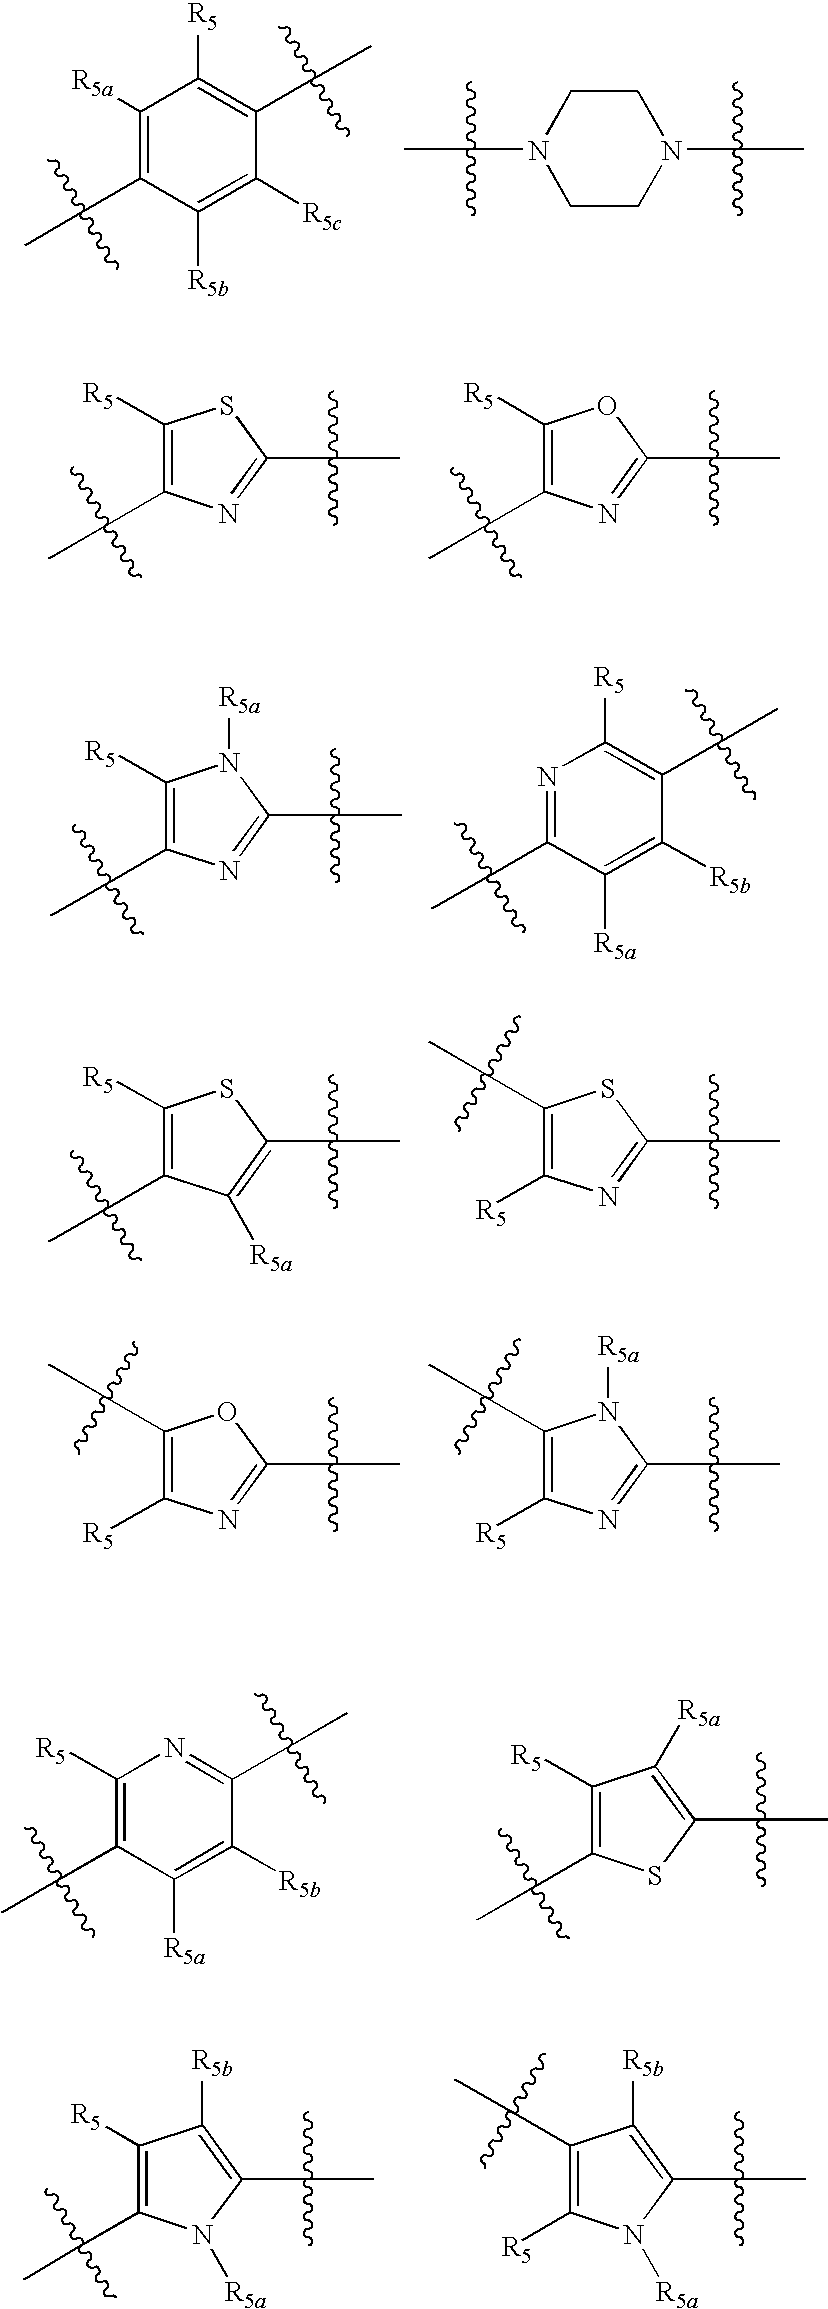 Compounds with activity at retinoic acid receptors